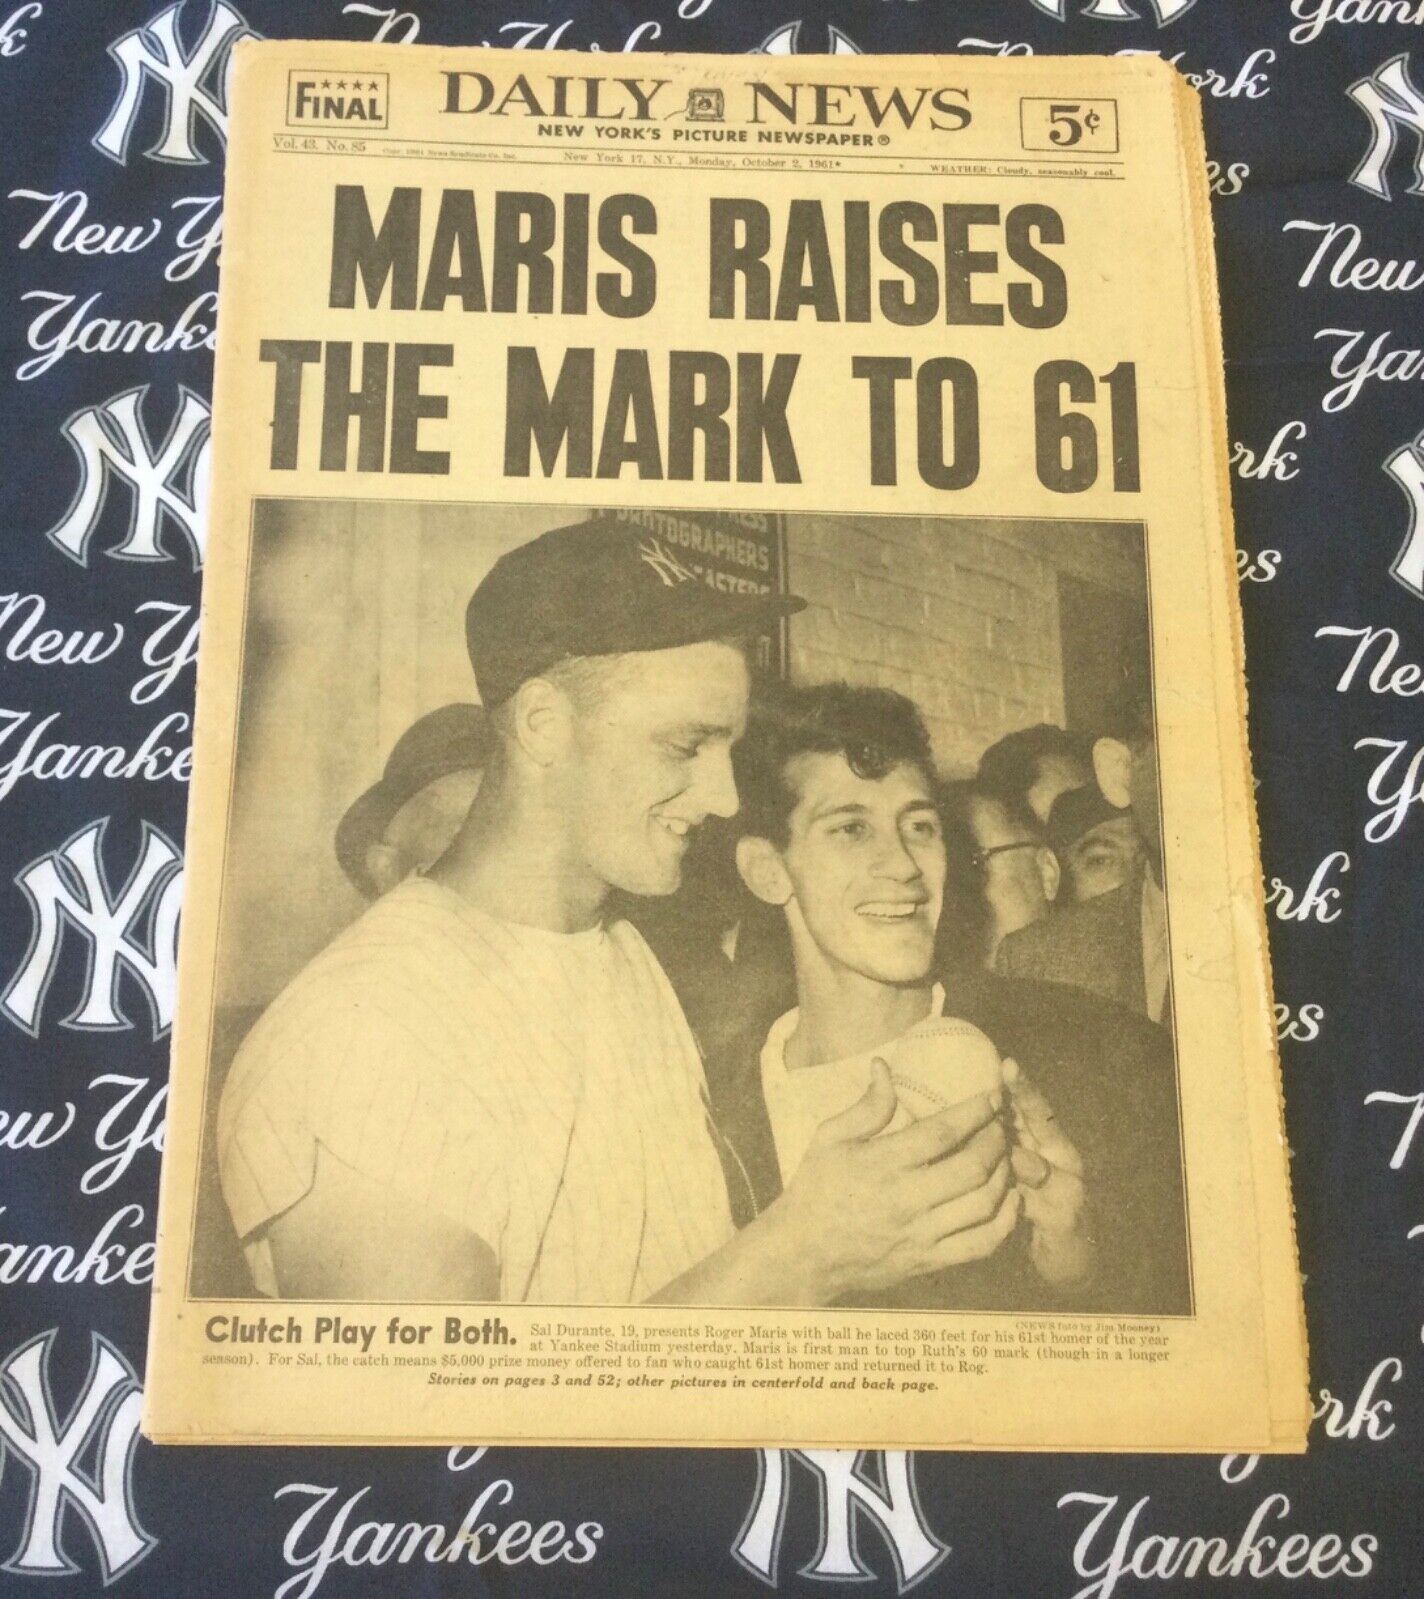 Roger Maris NY Yankees ORIGINAL COMPLETE  Daily News October 2, 1961  NEAR MINT